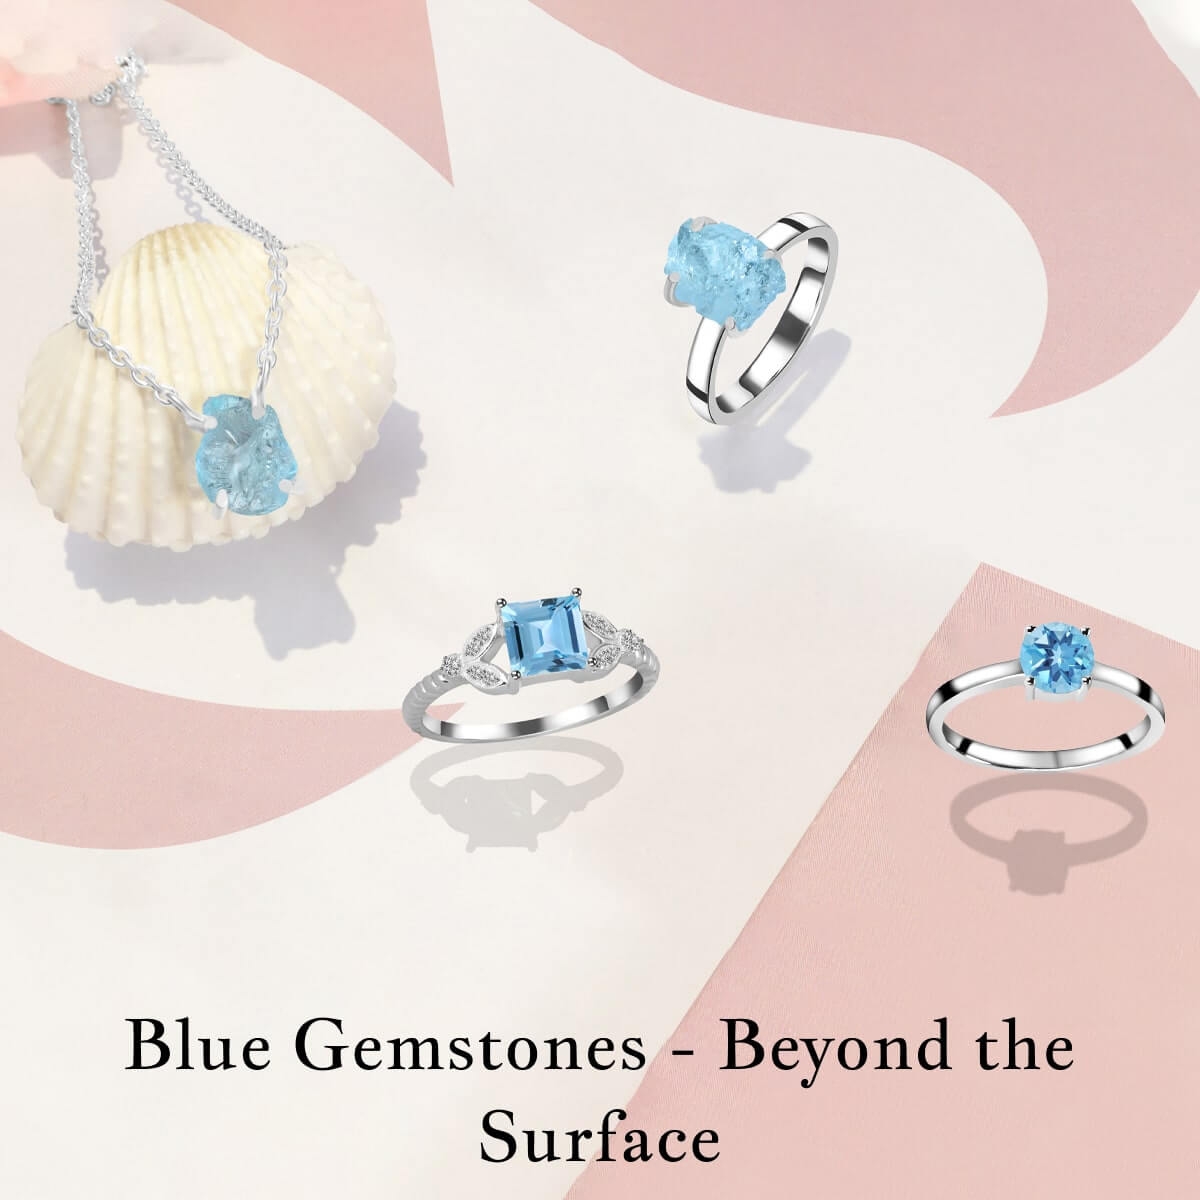 Blue Gemstones Facts, Meaning, and Healing Properties